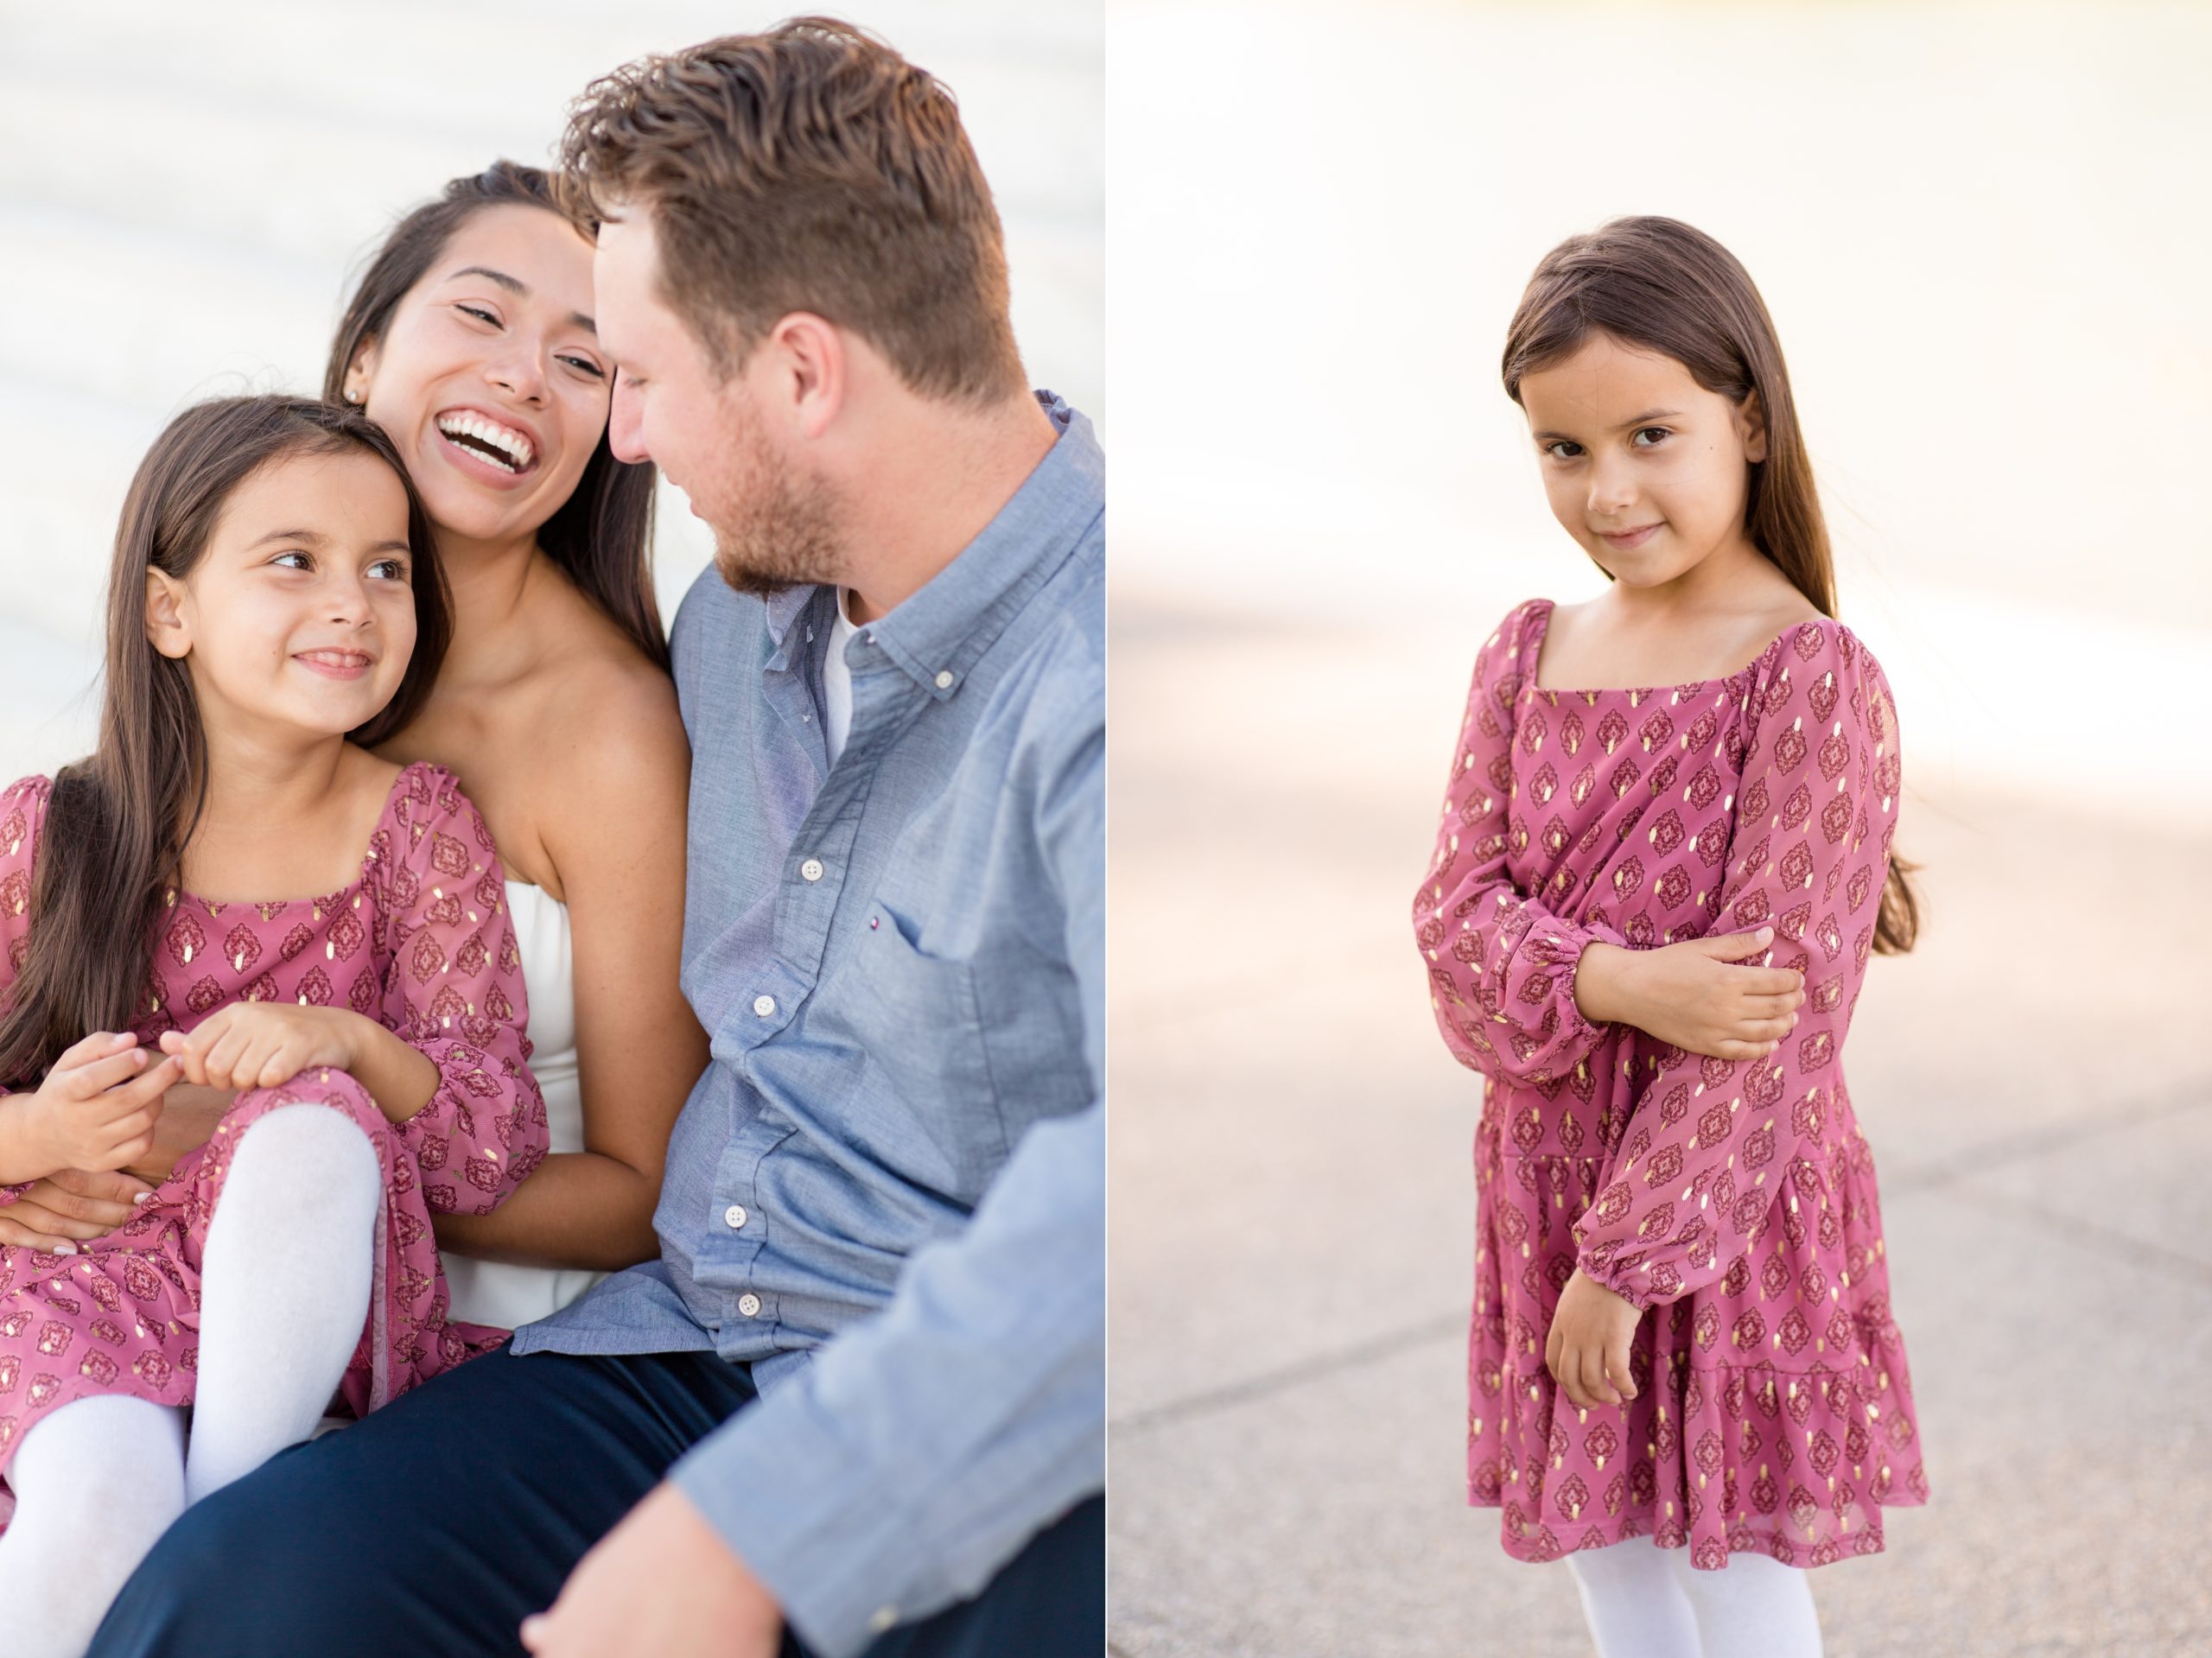 Summer family portrait session in Washington, DC with Rebecca Rice Photography.